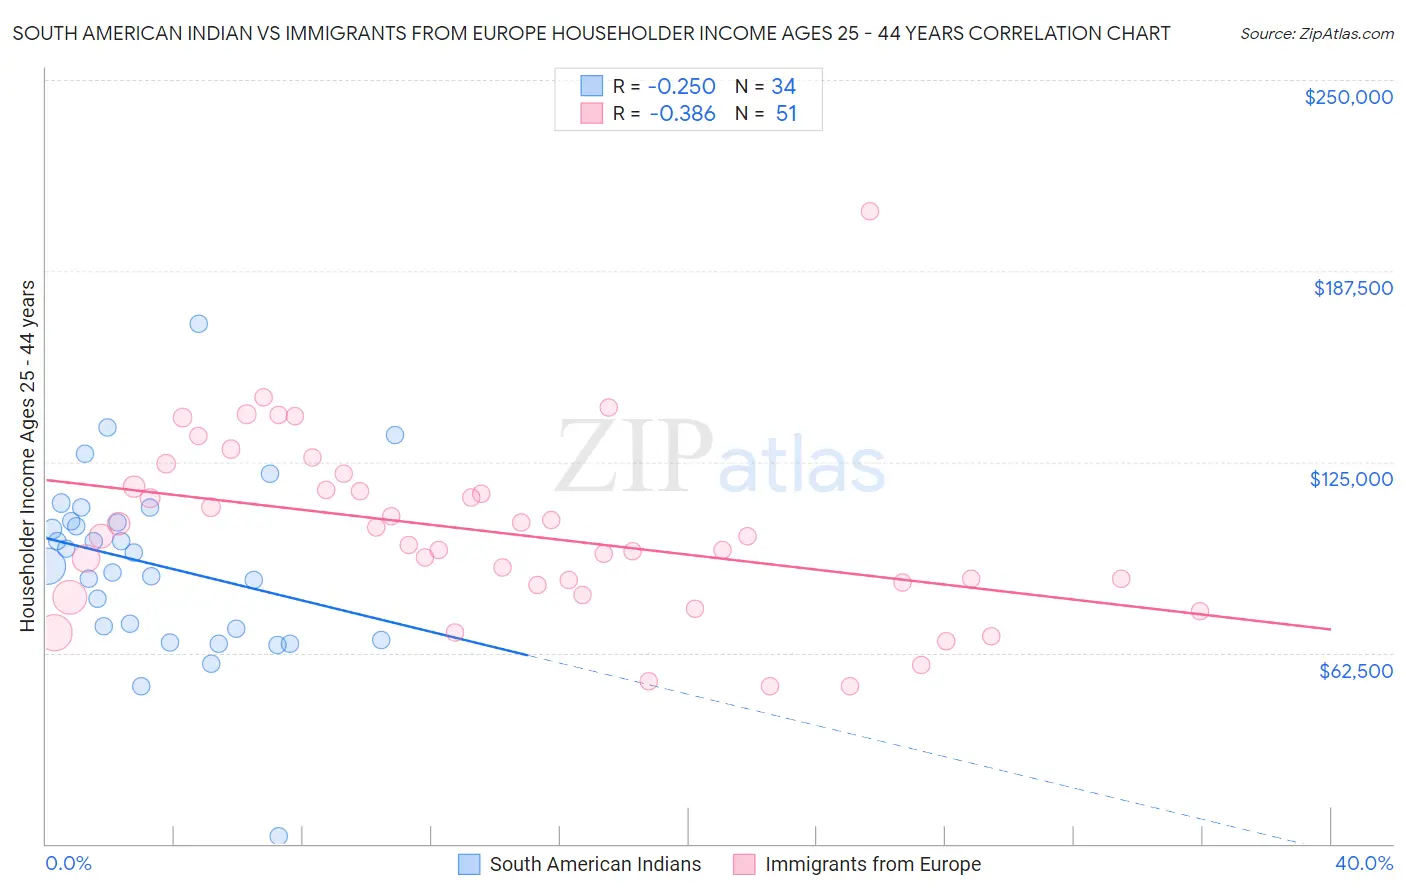 South American Indian vs Immigrants from Europe Householder Income Ages 25 - 44 years